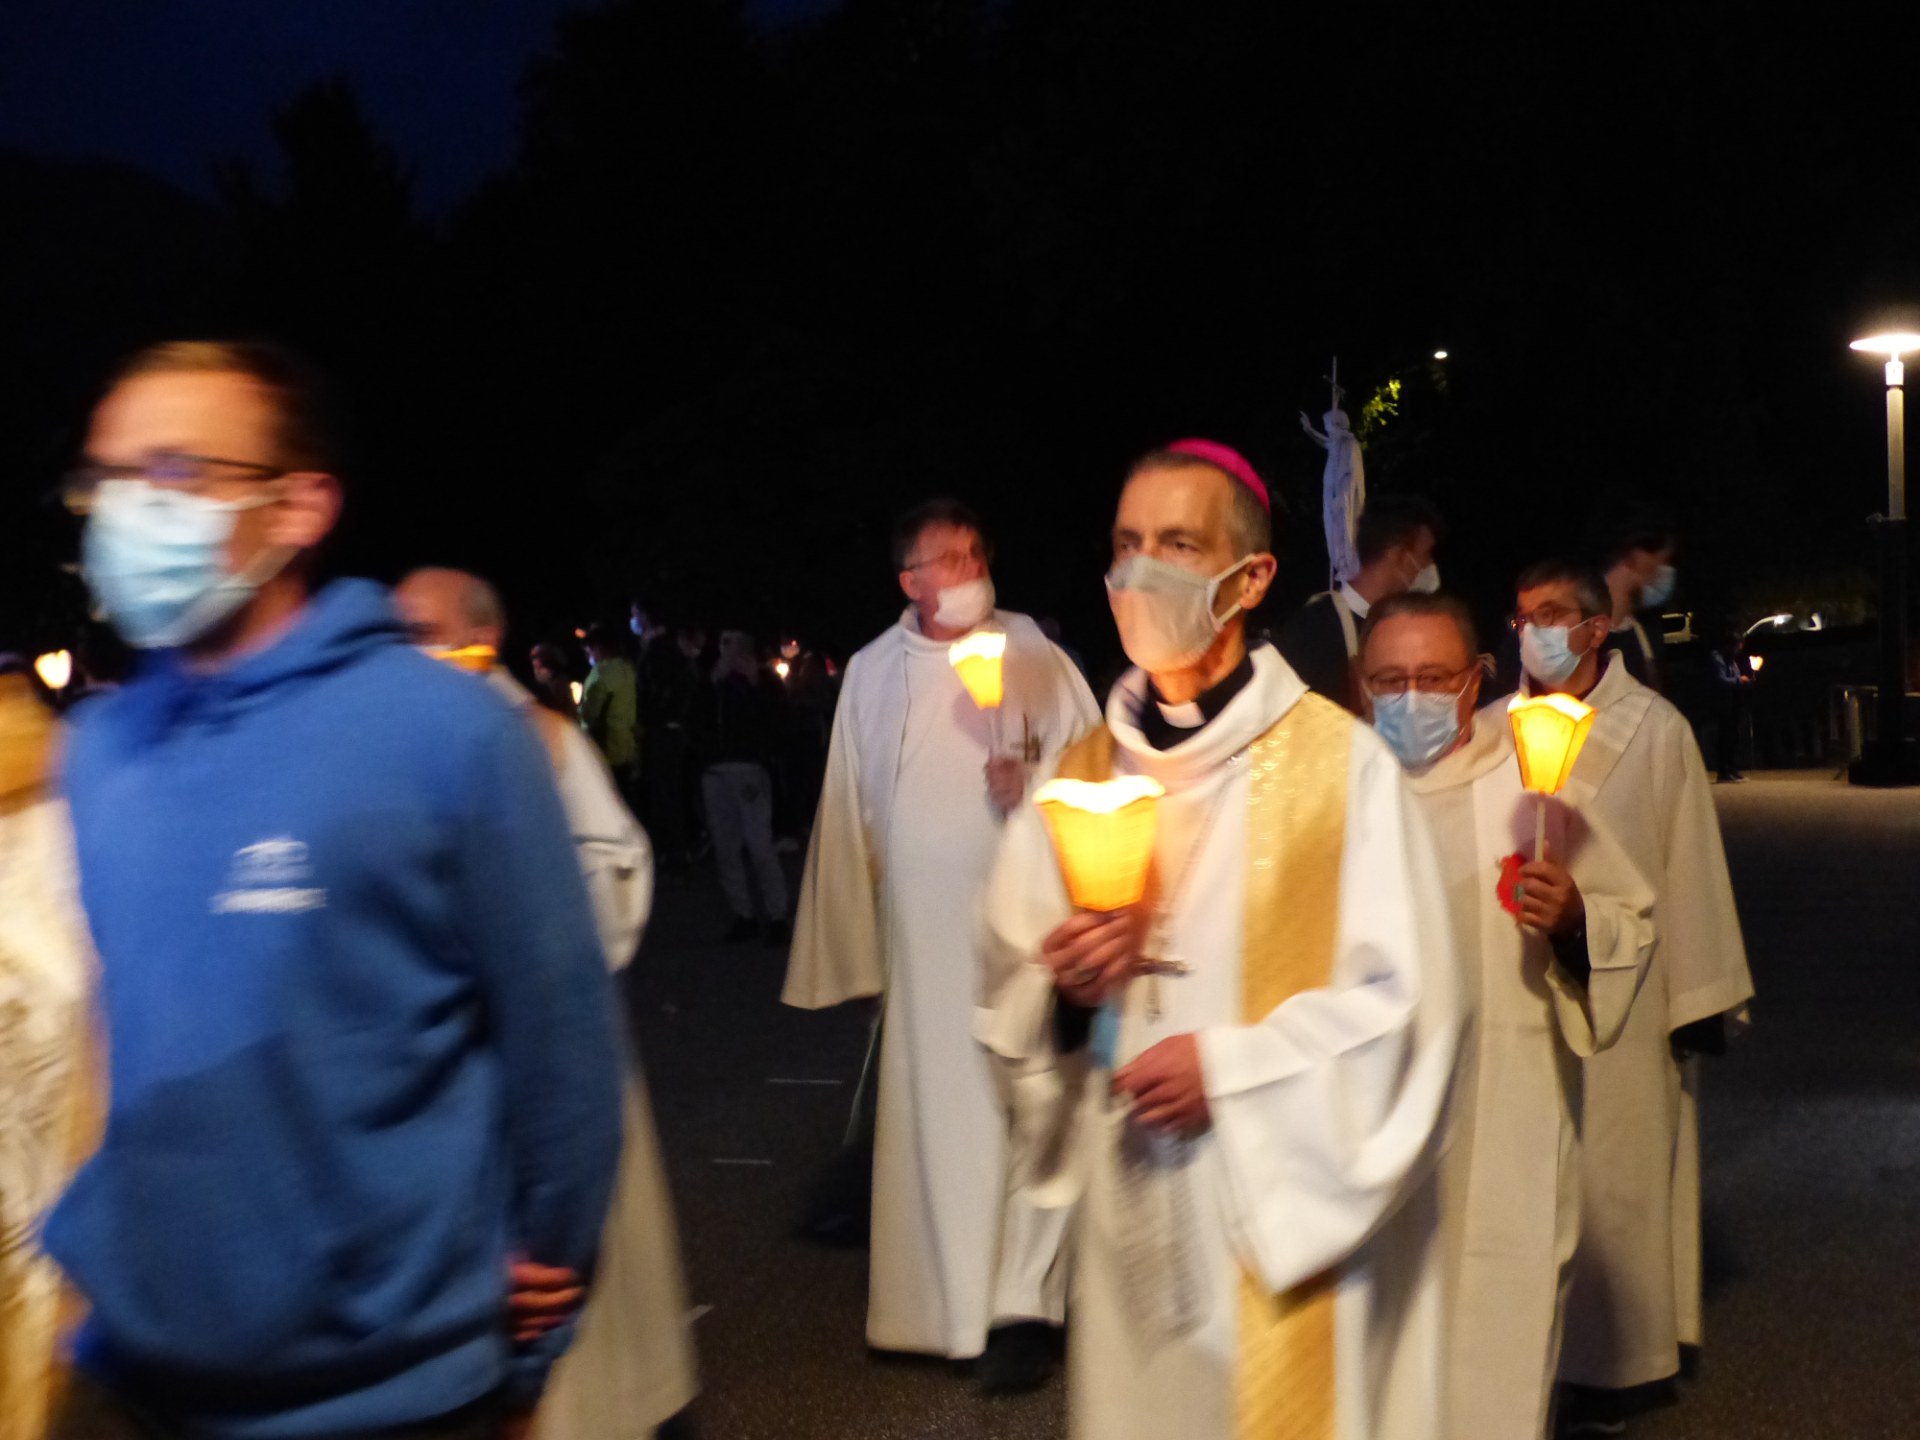 20210819-procession-mariale (13)